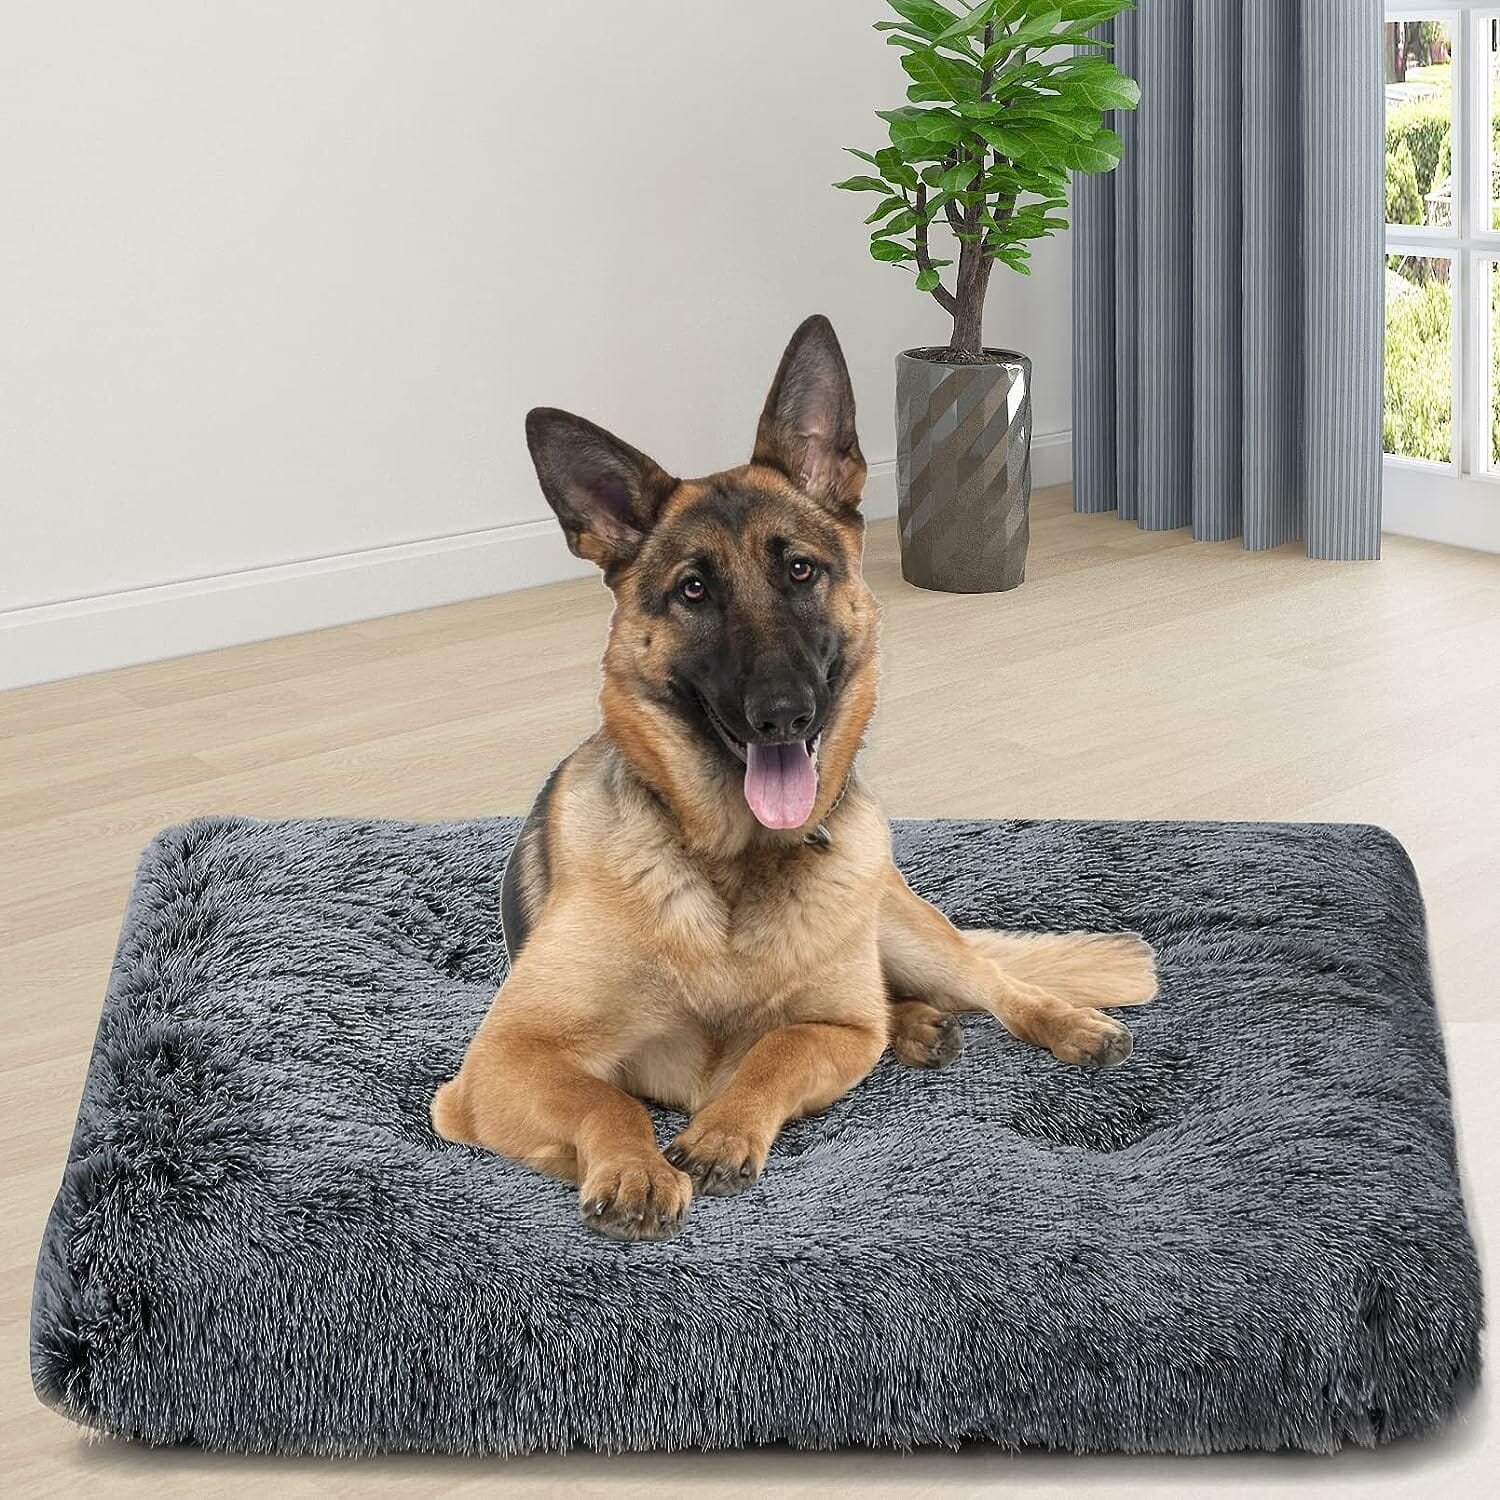 Crate Pet Bed Review – The Ultimate Comfort for Your Furry Friend?